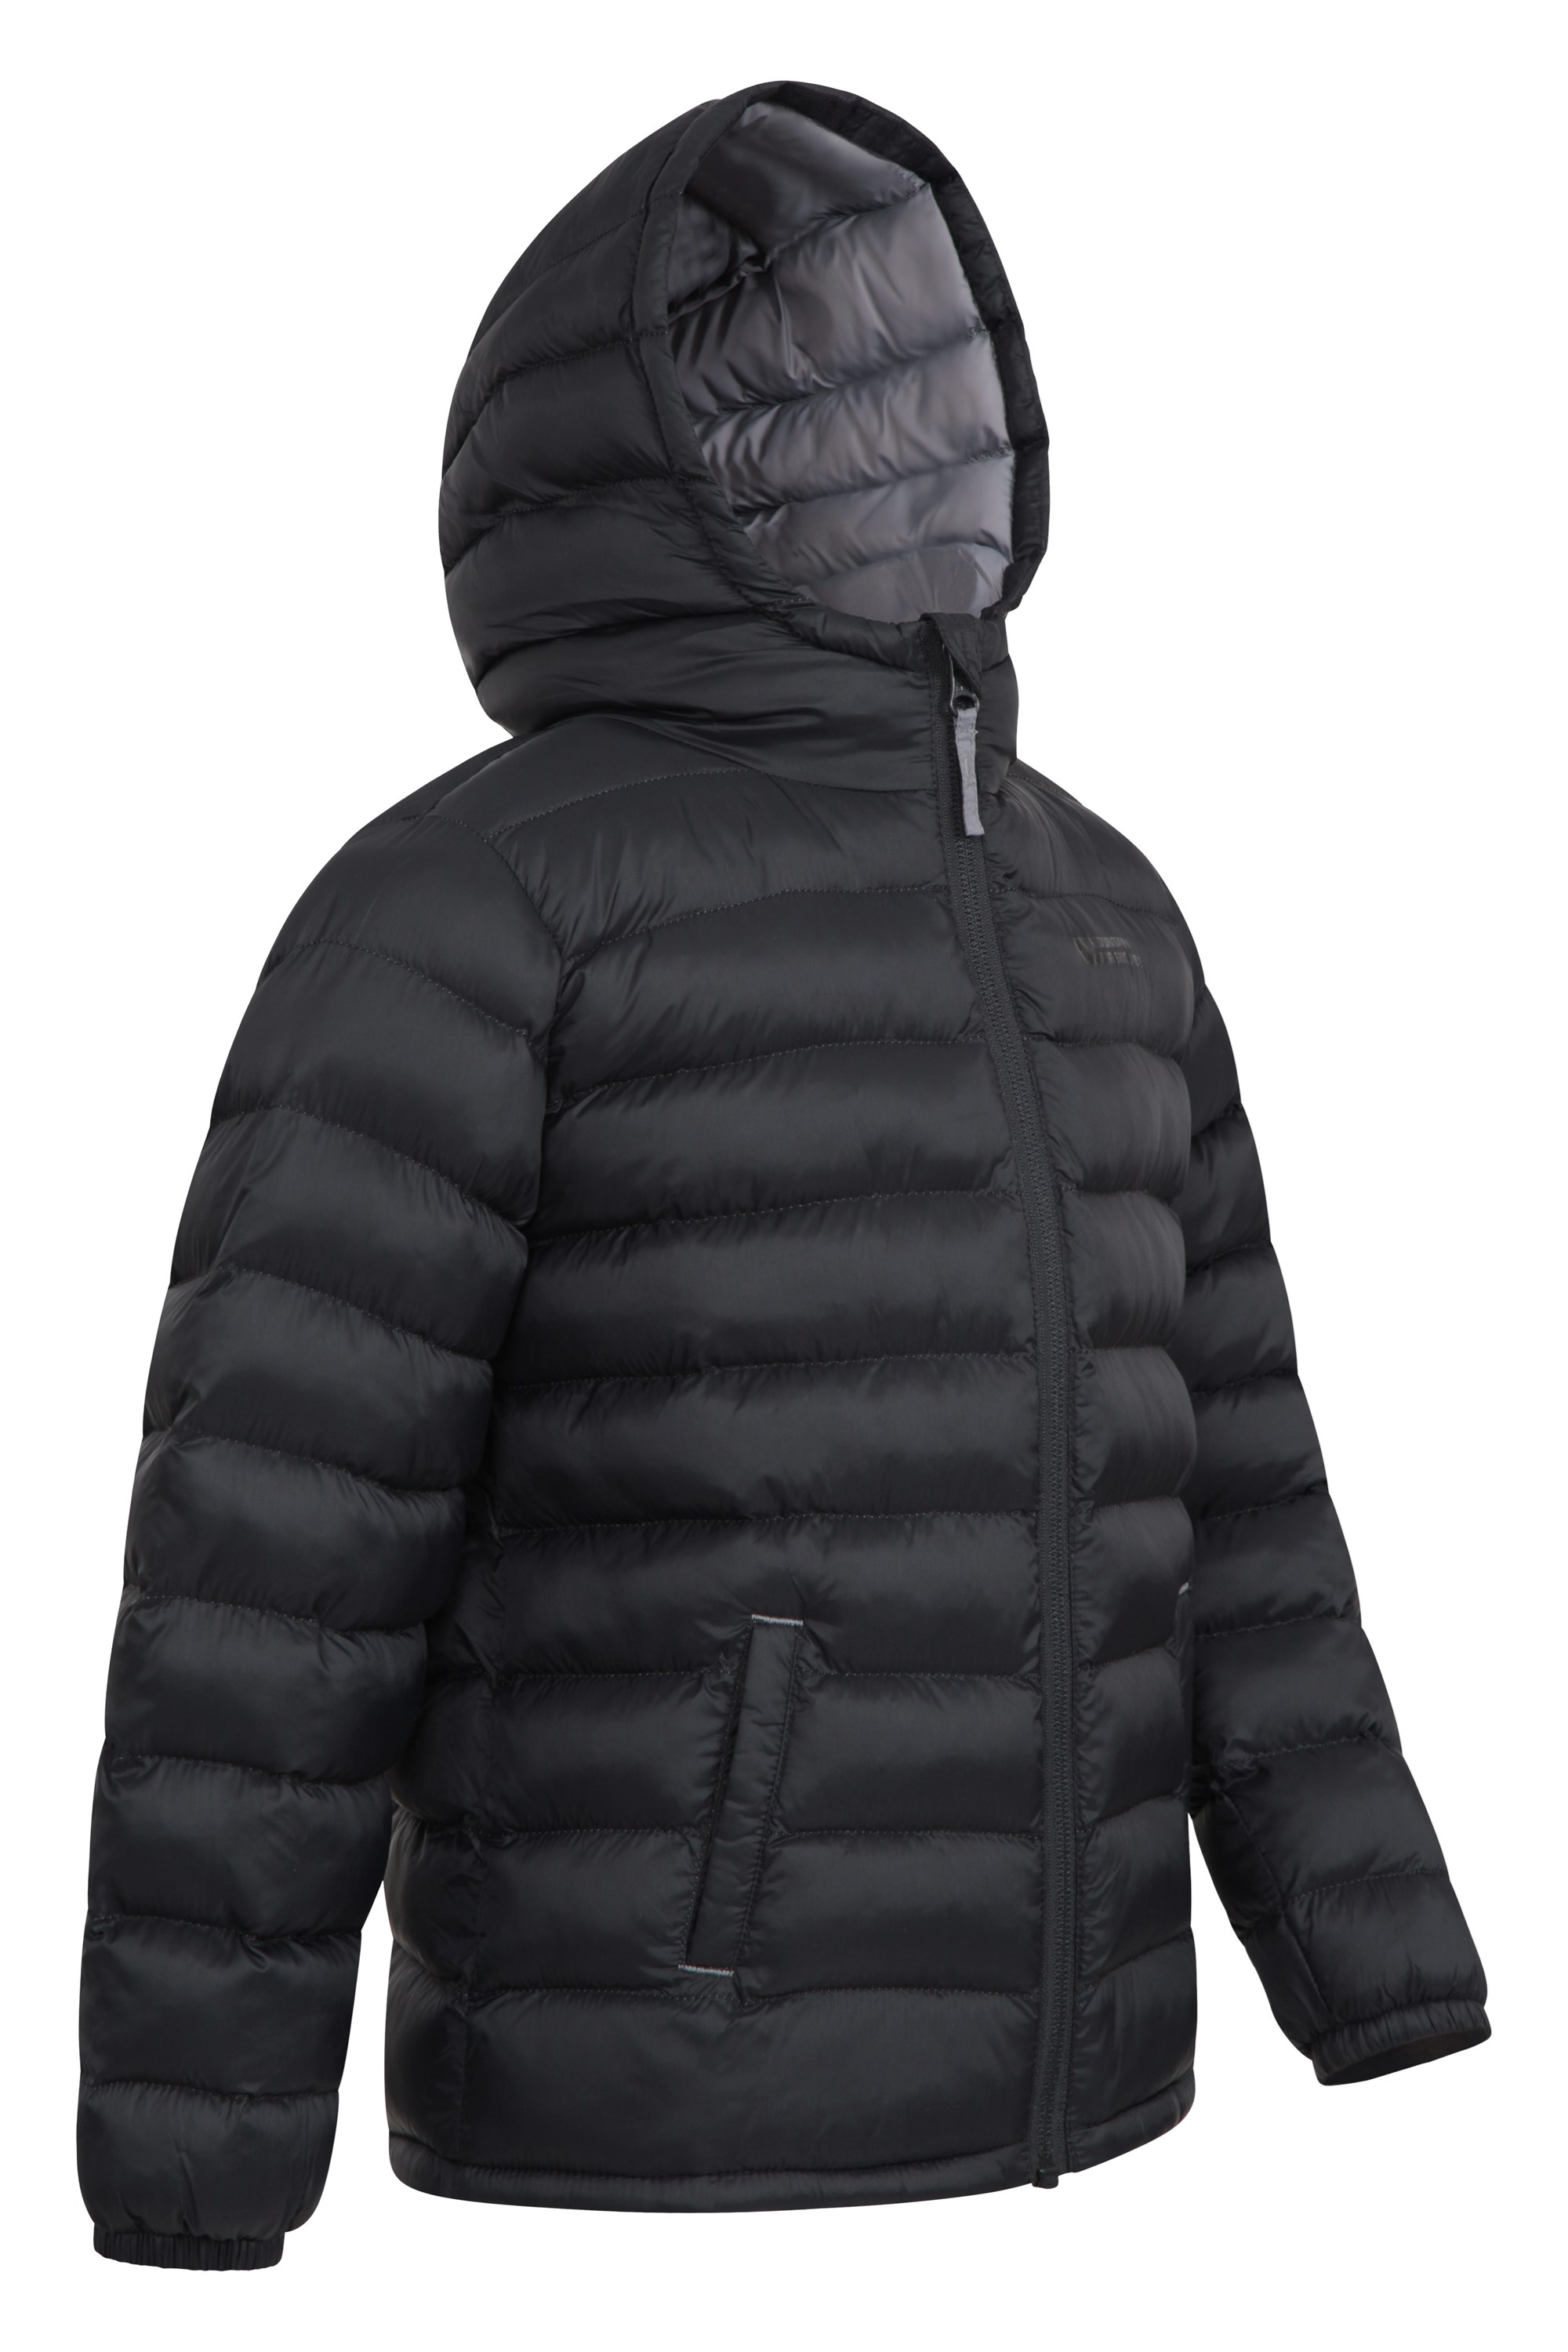 Winter School or Travelling Great for Autumn Mountain Warehouse Seasons Padded Kids Jacket Water Resistant & Lightweight Insulated Rain Coat for Boys & Girls